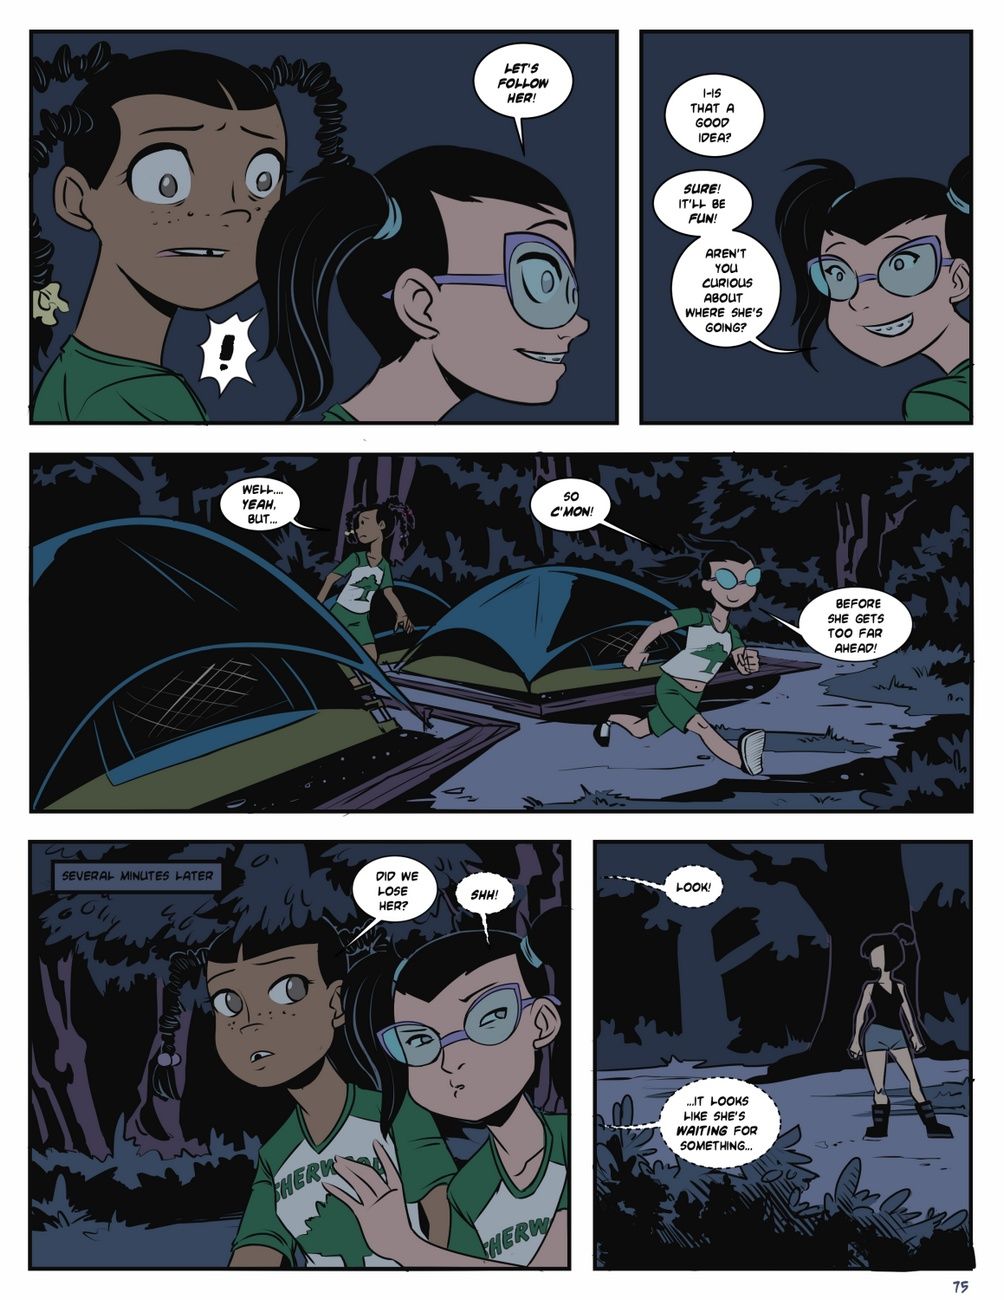 Camp Sherwood [Mr.D] (Ongoing) page 76